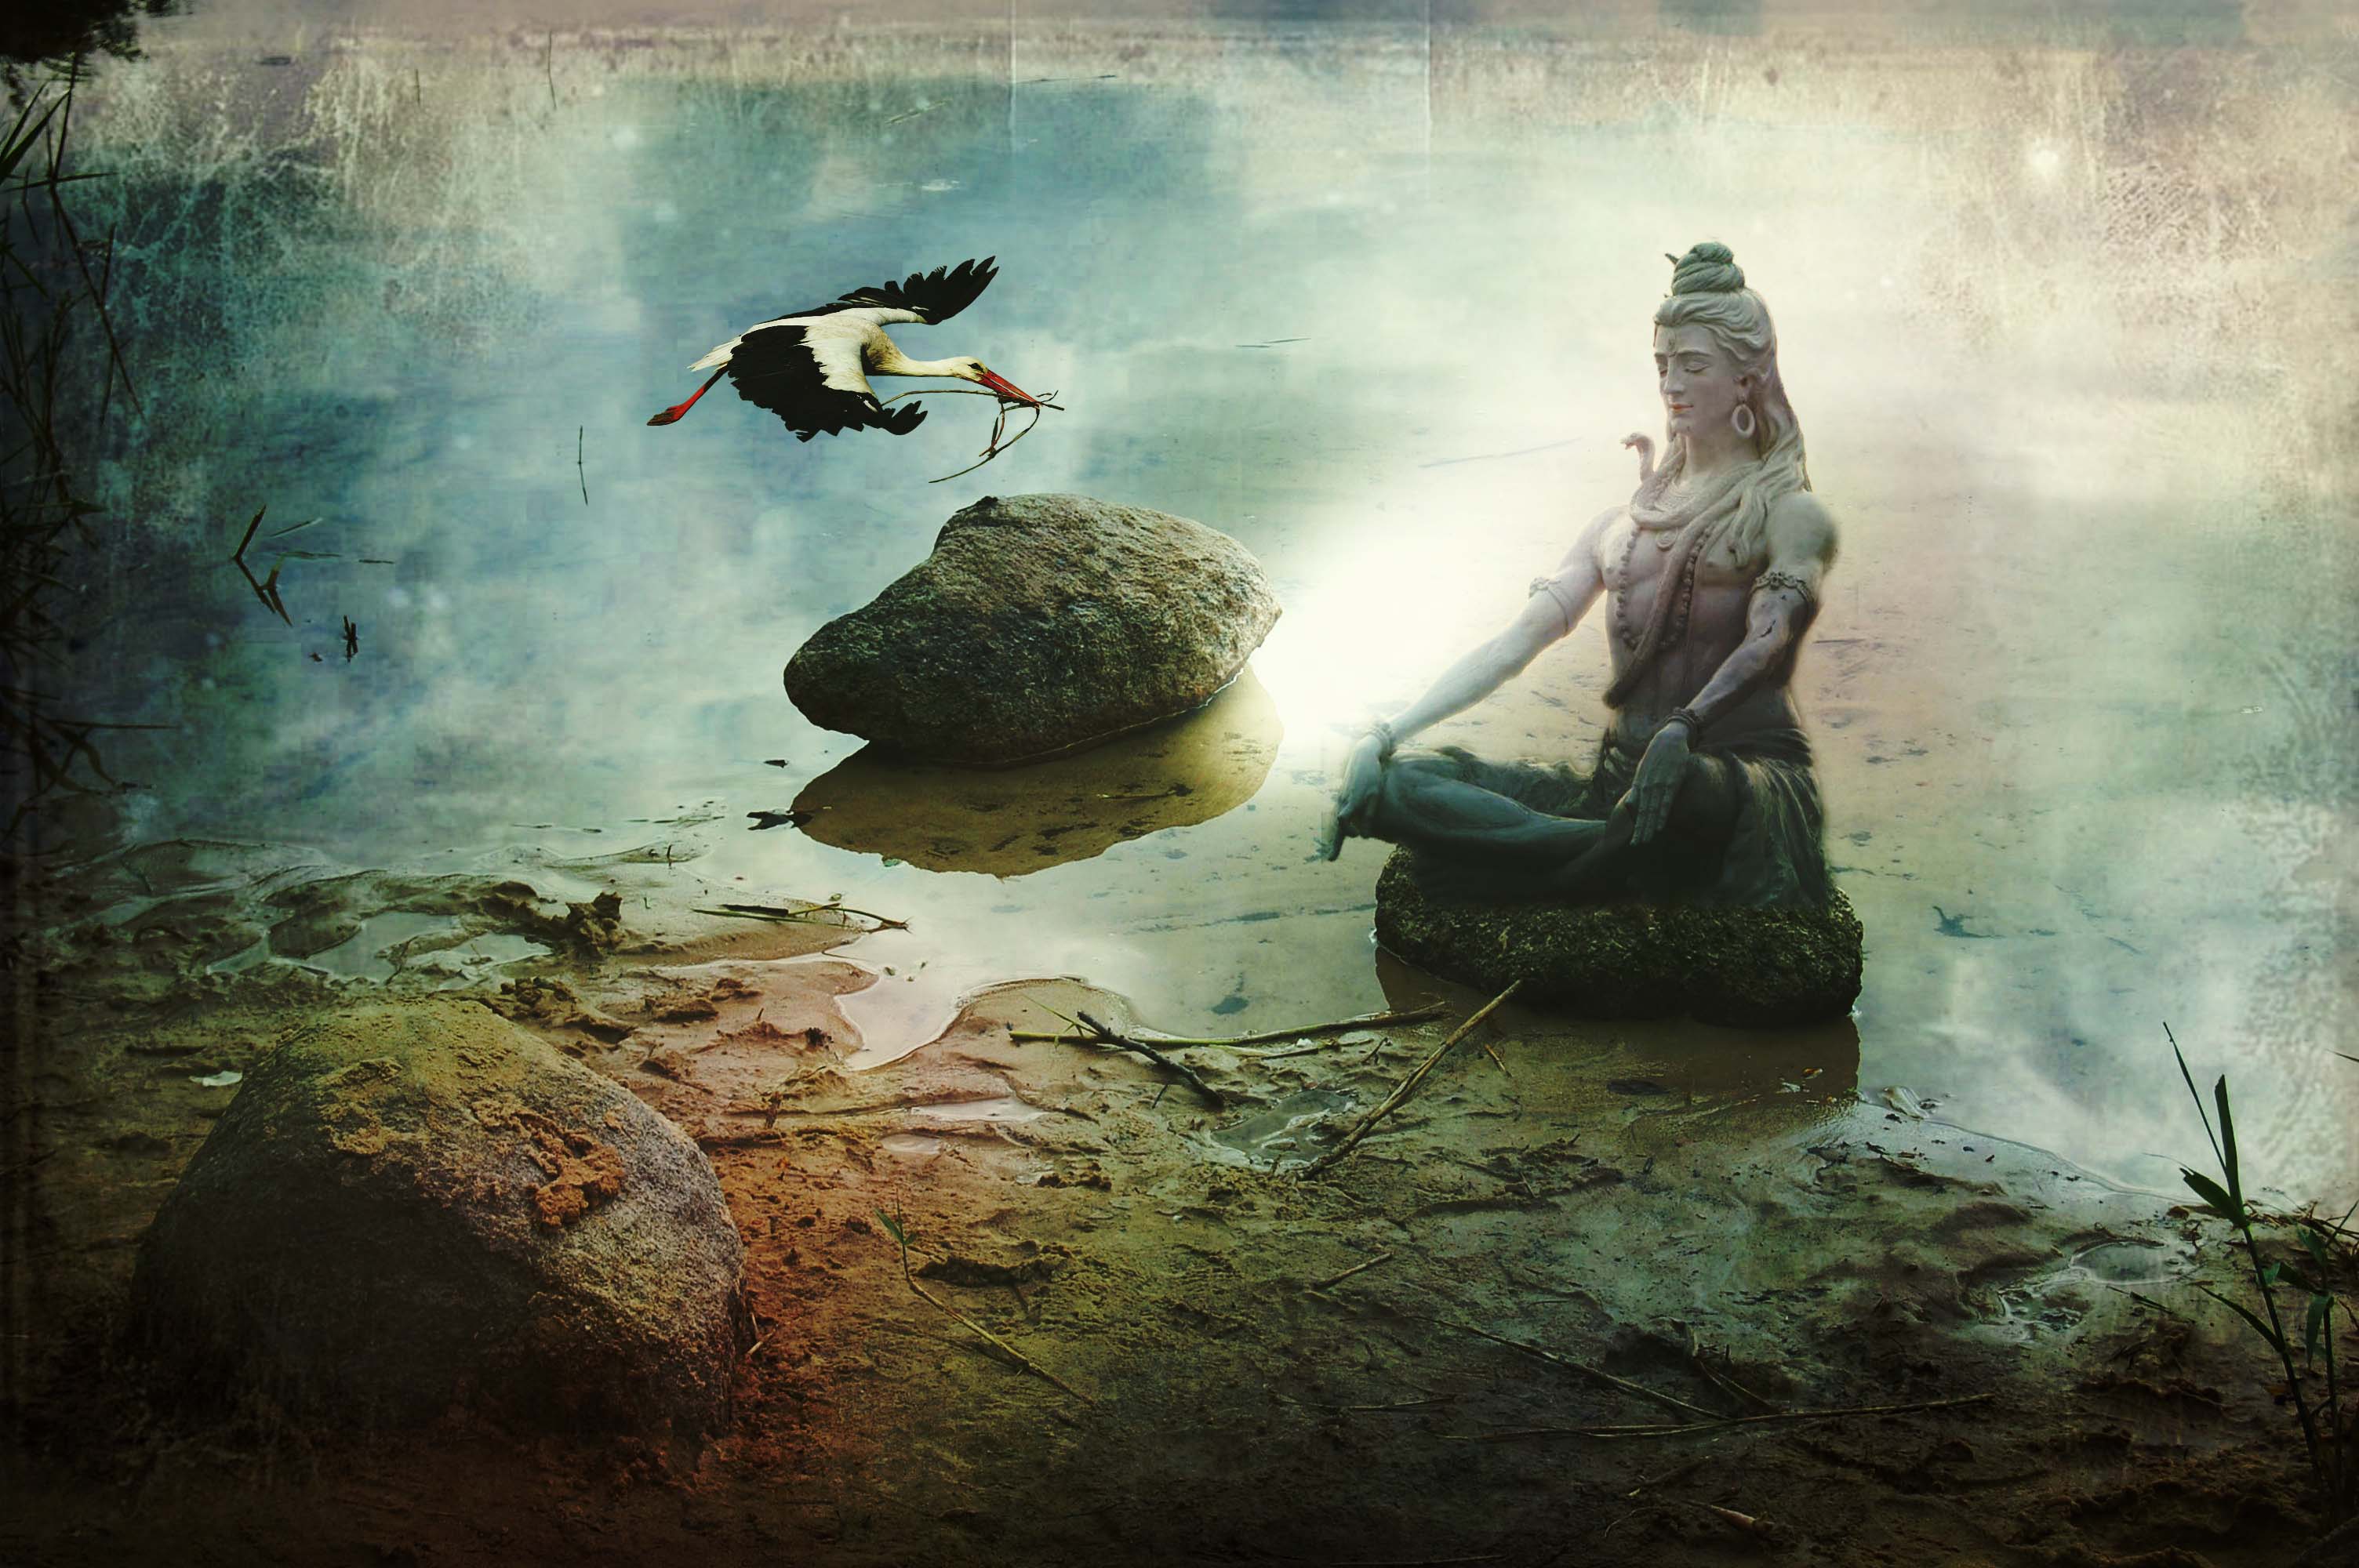 Lord Shiva 3D Wallpapers - Wallpaper Cave